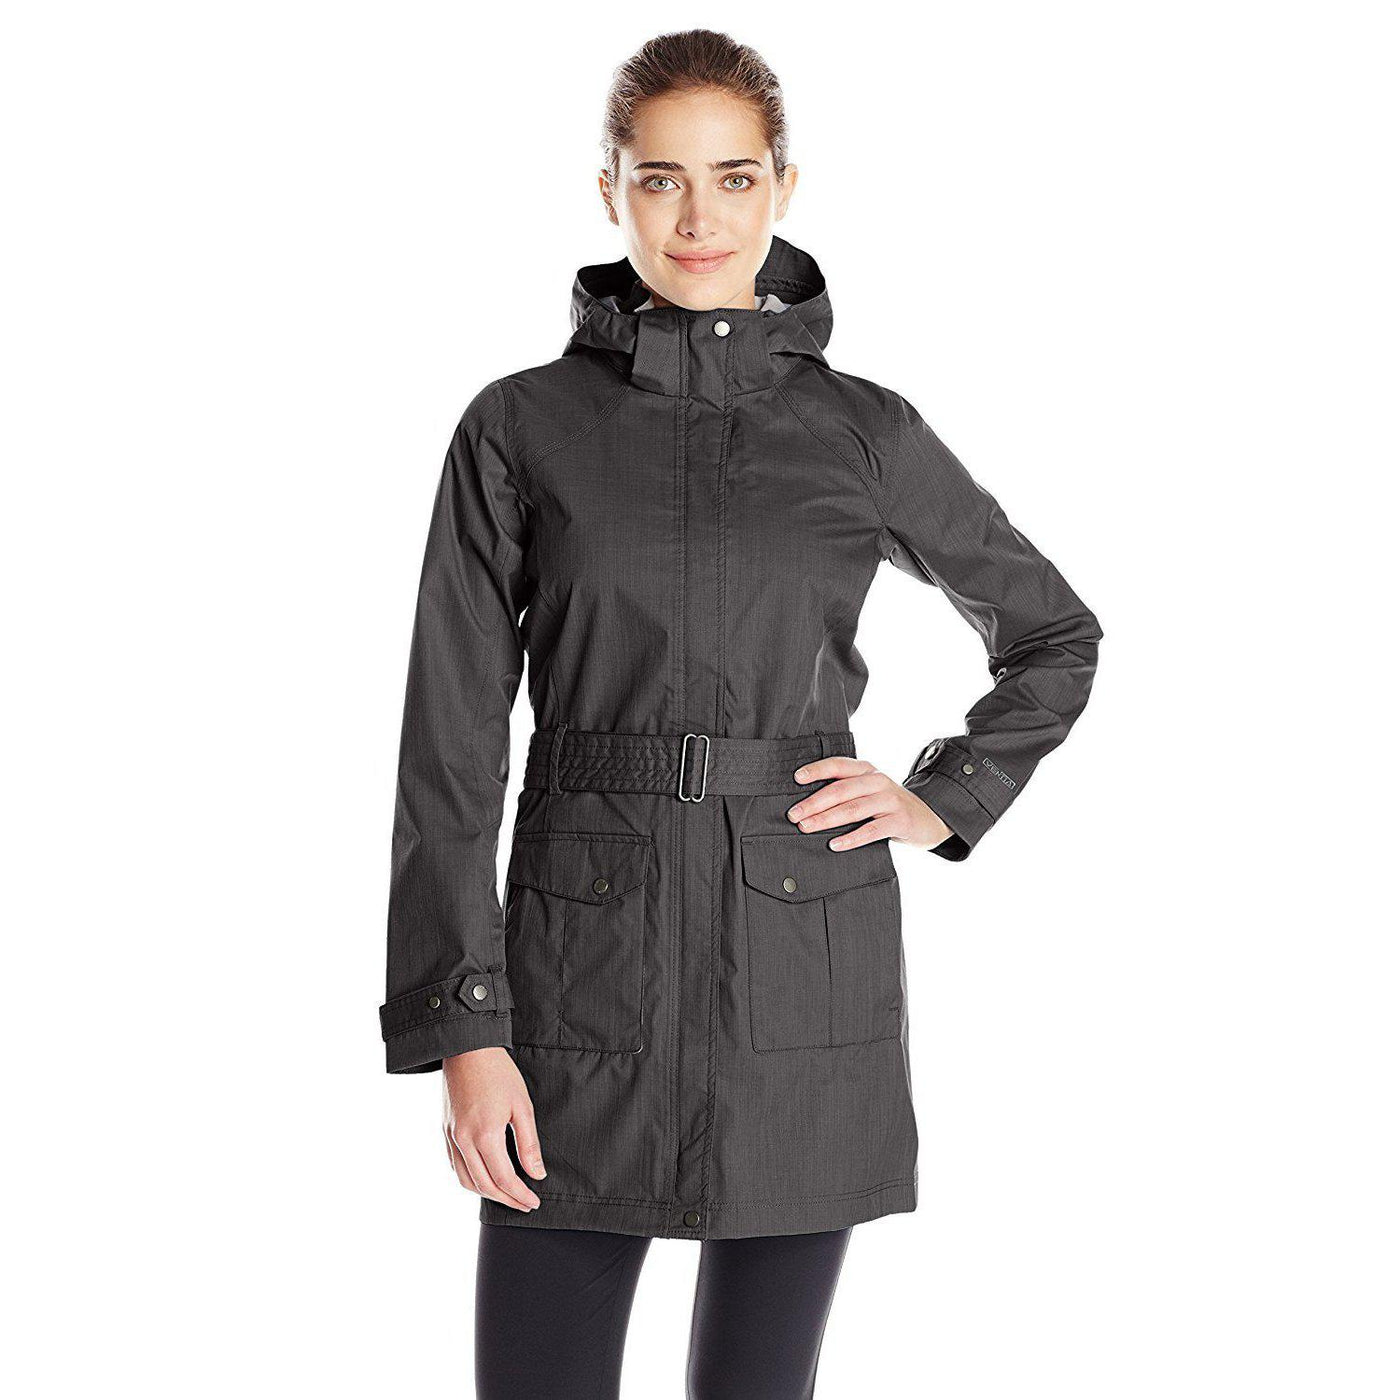 Outdoor Research Envy Jacket –